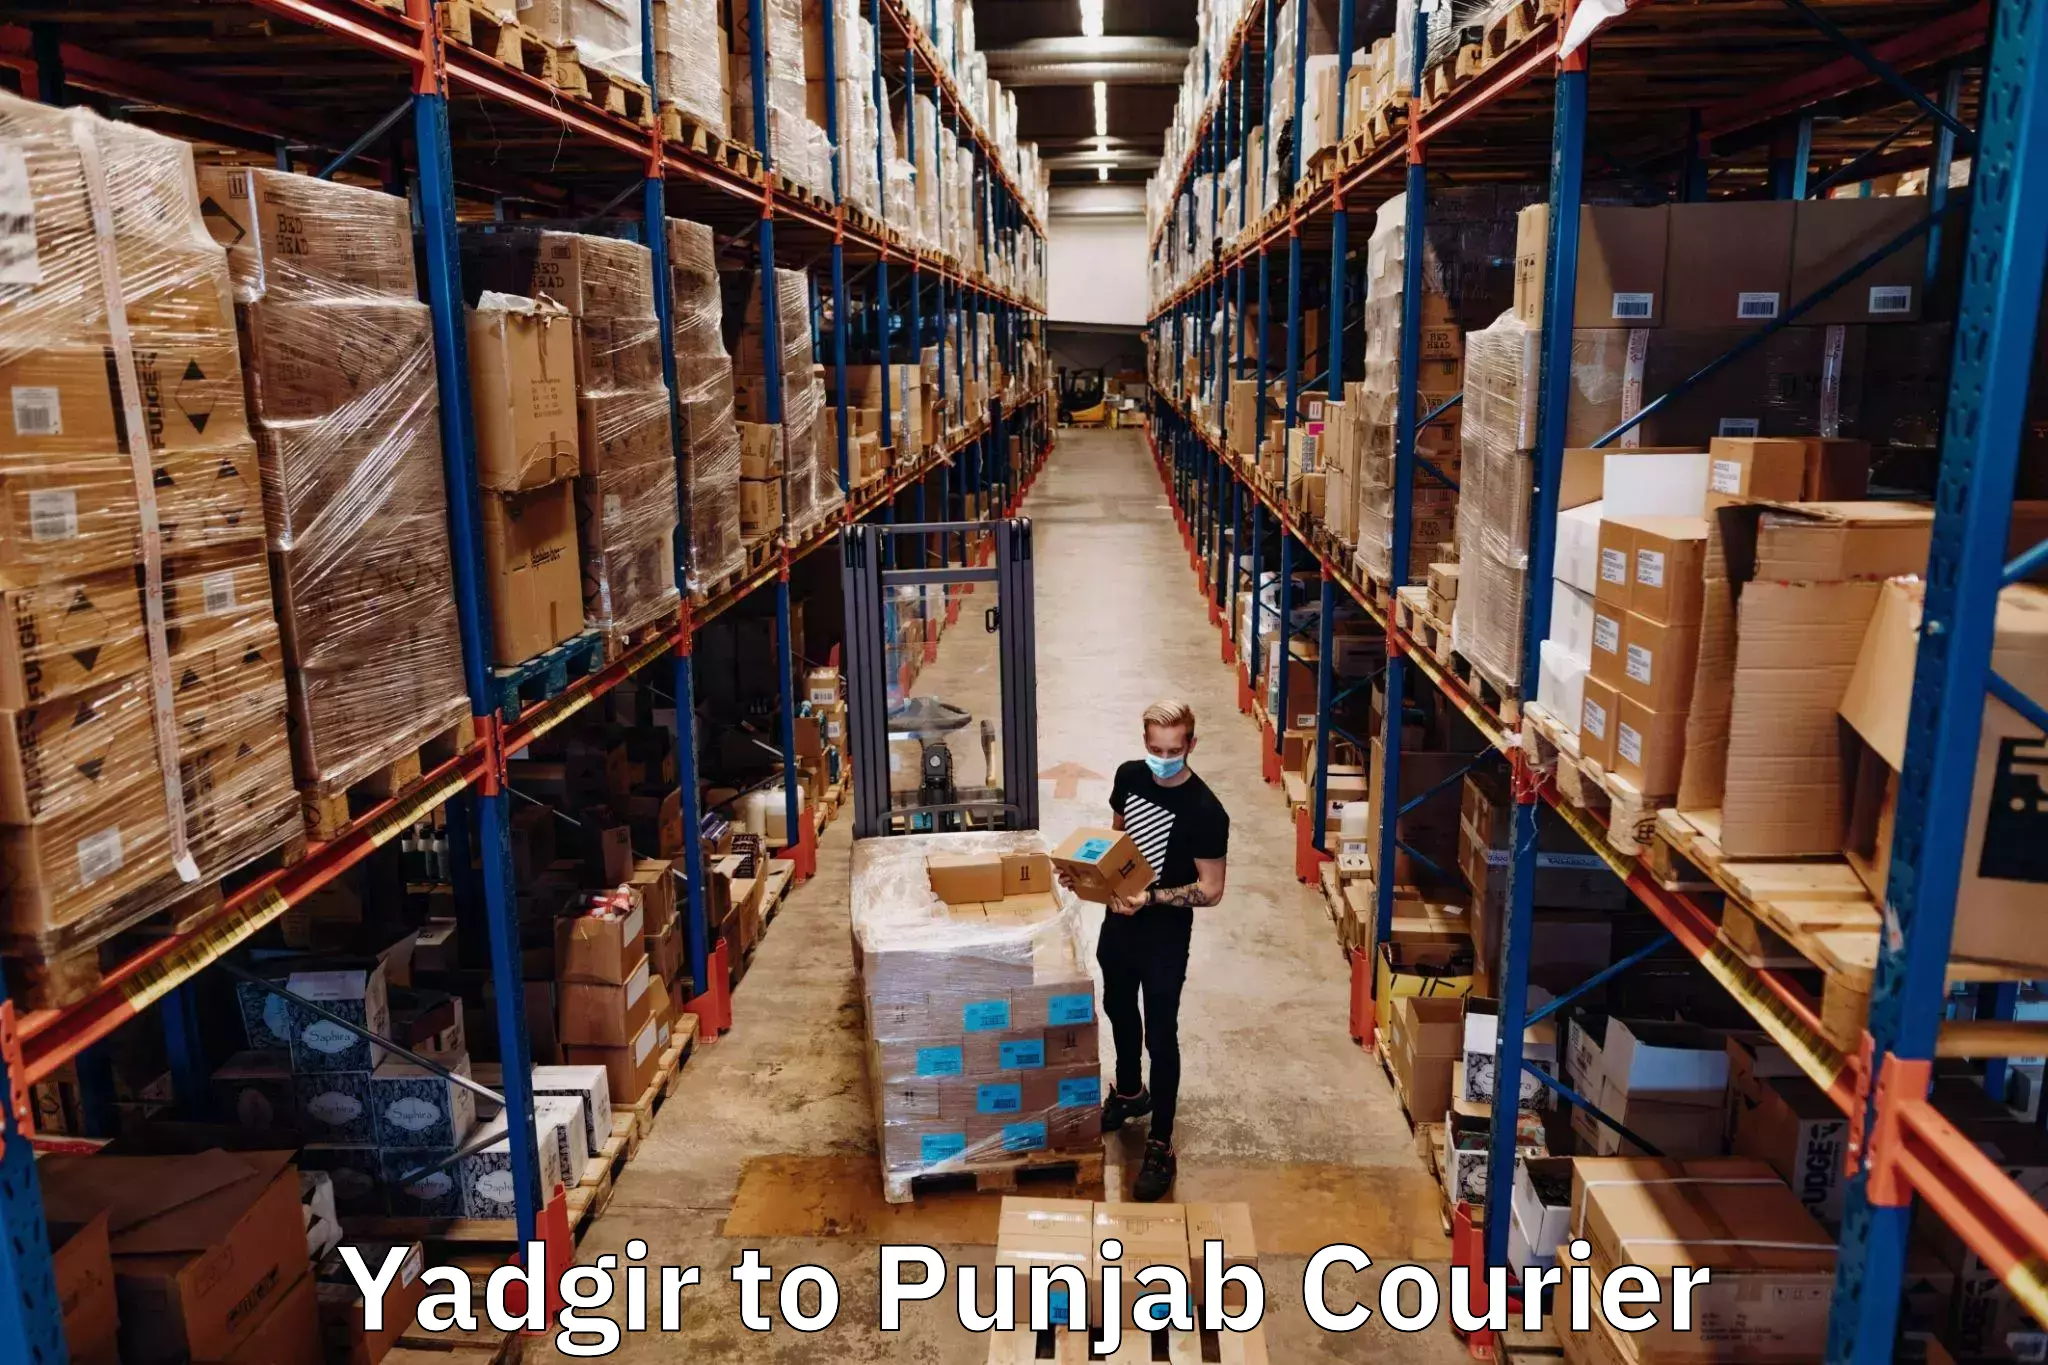 State-of-the-art courier technology Yadgir to Punjab